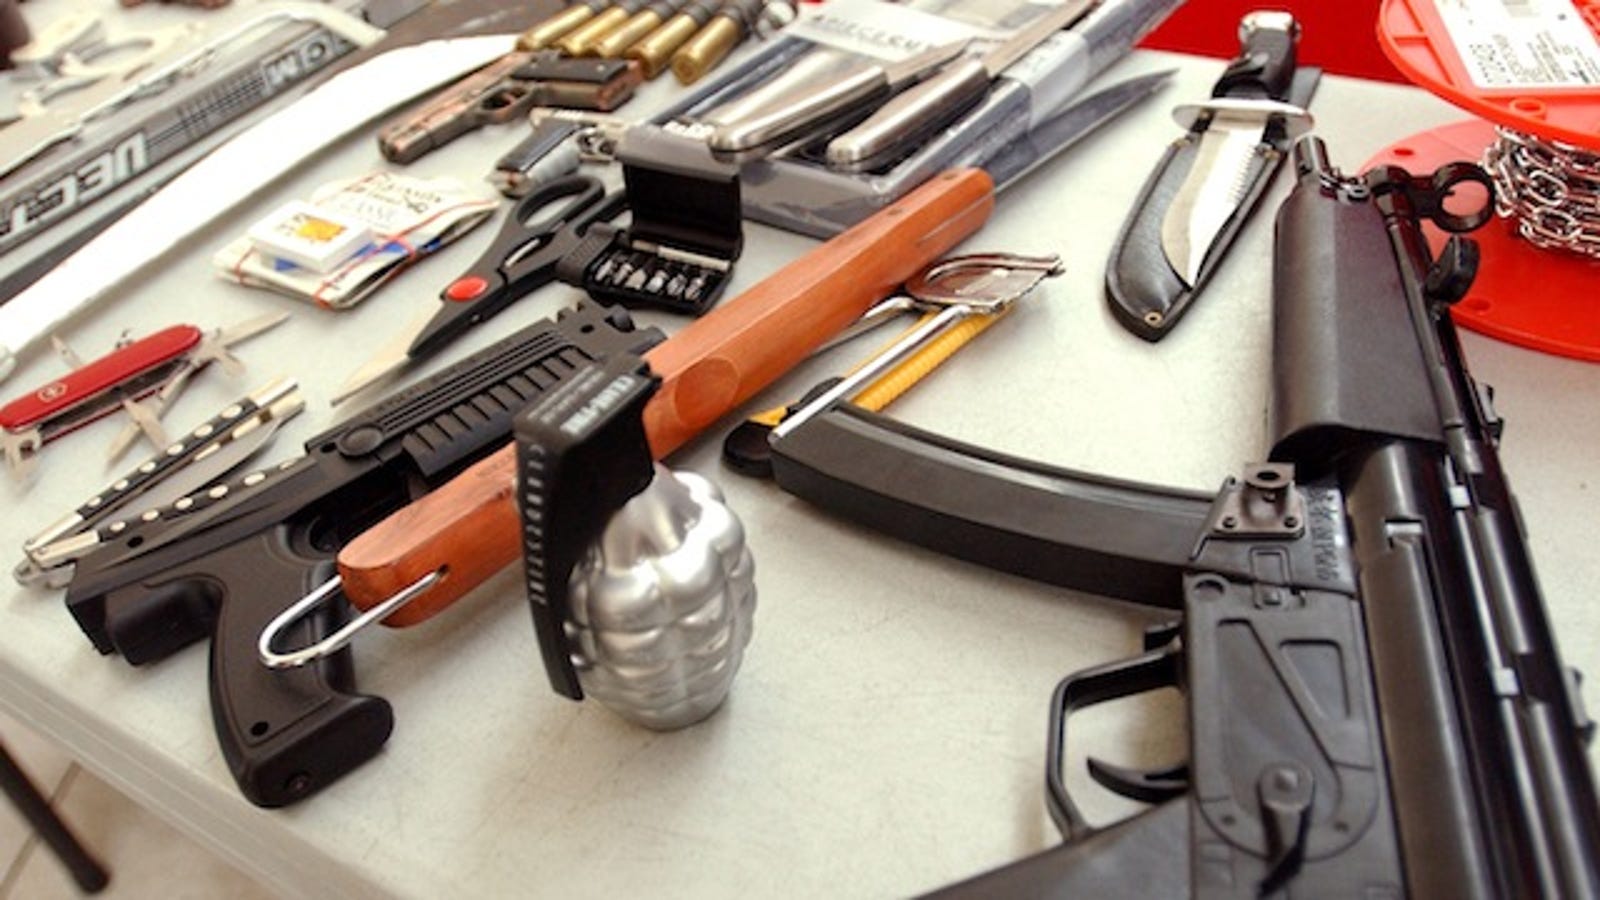 The TSA Finds About 5 Guns at Security Checkpoints EVERY DAY